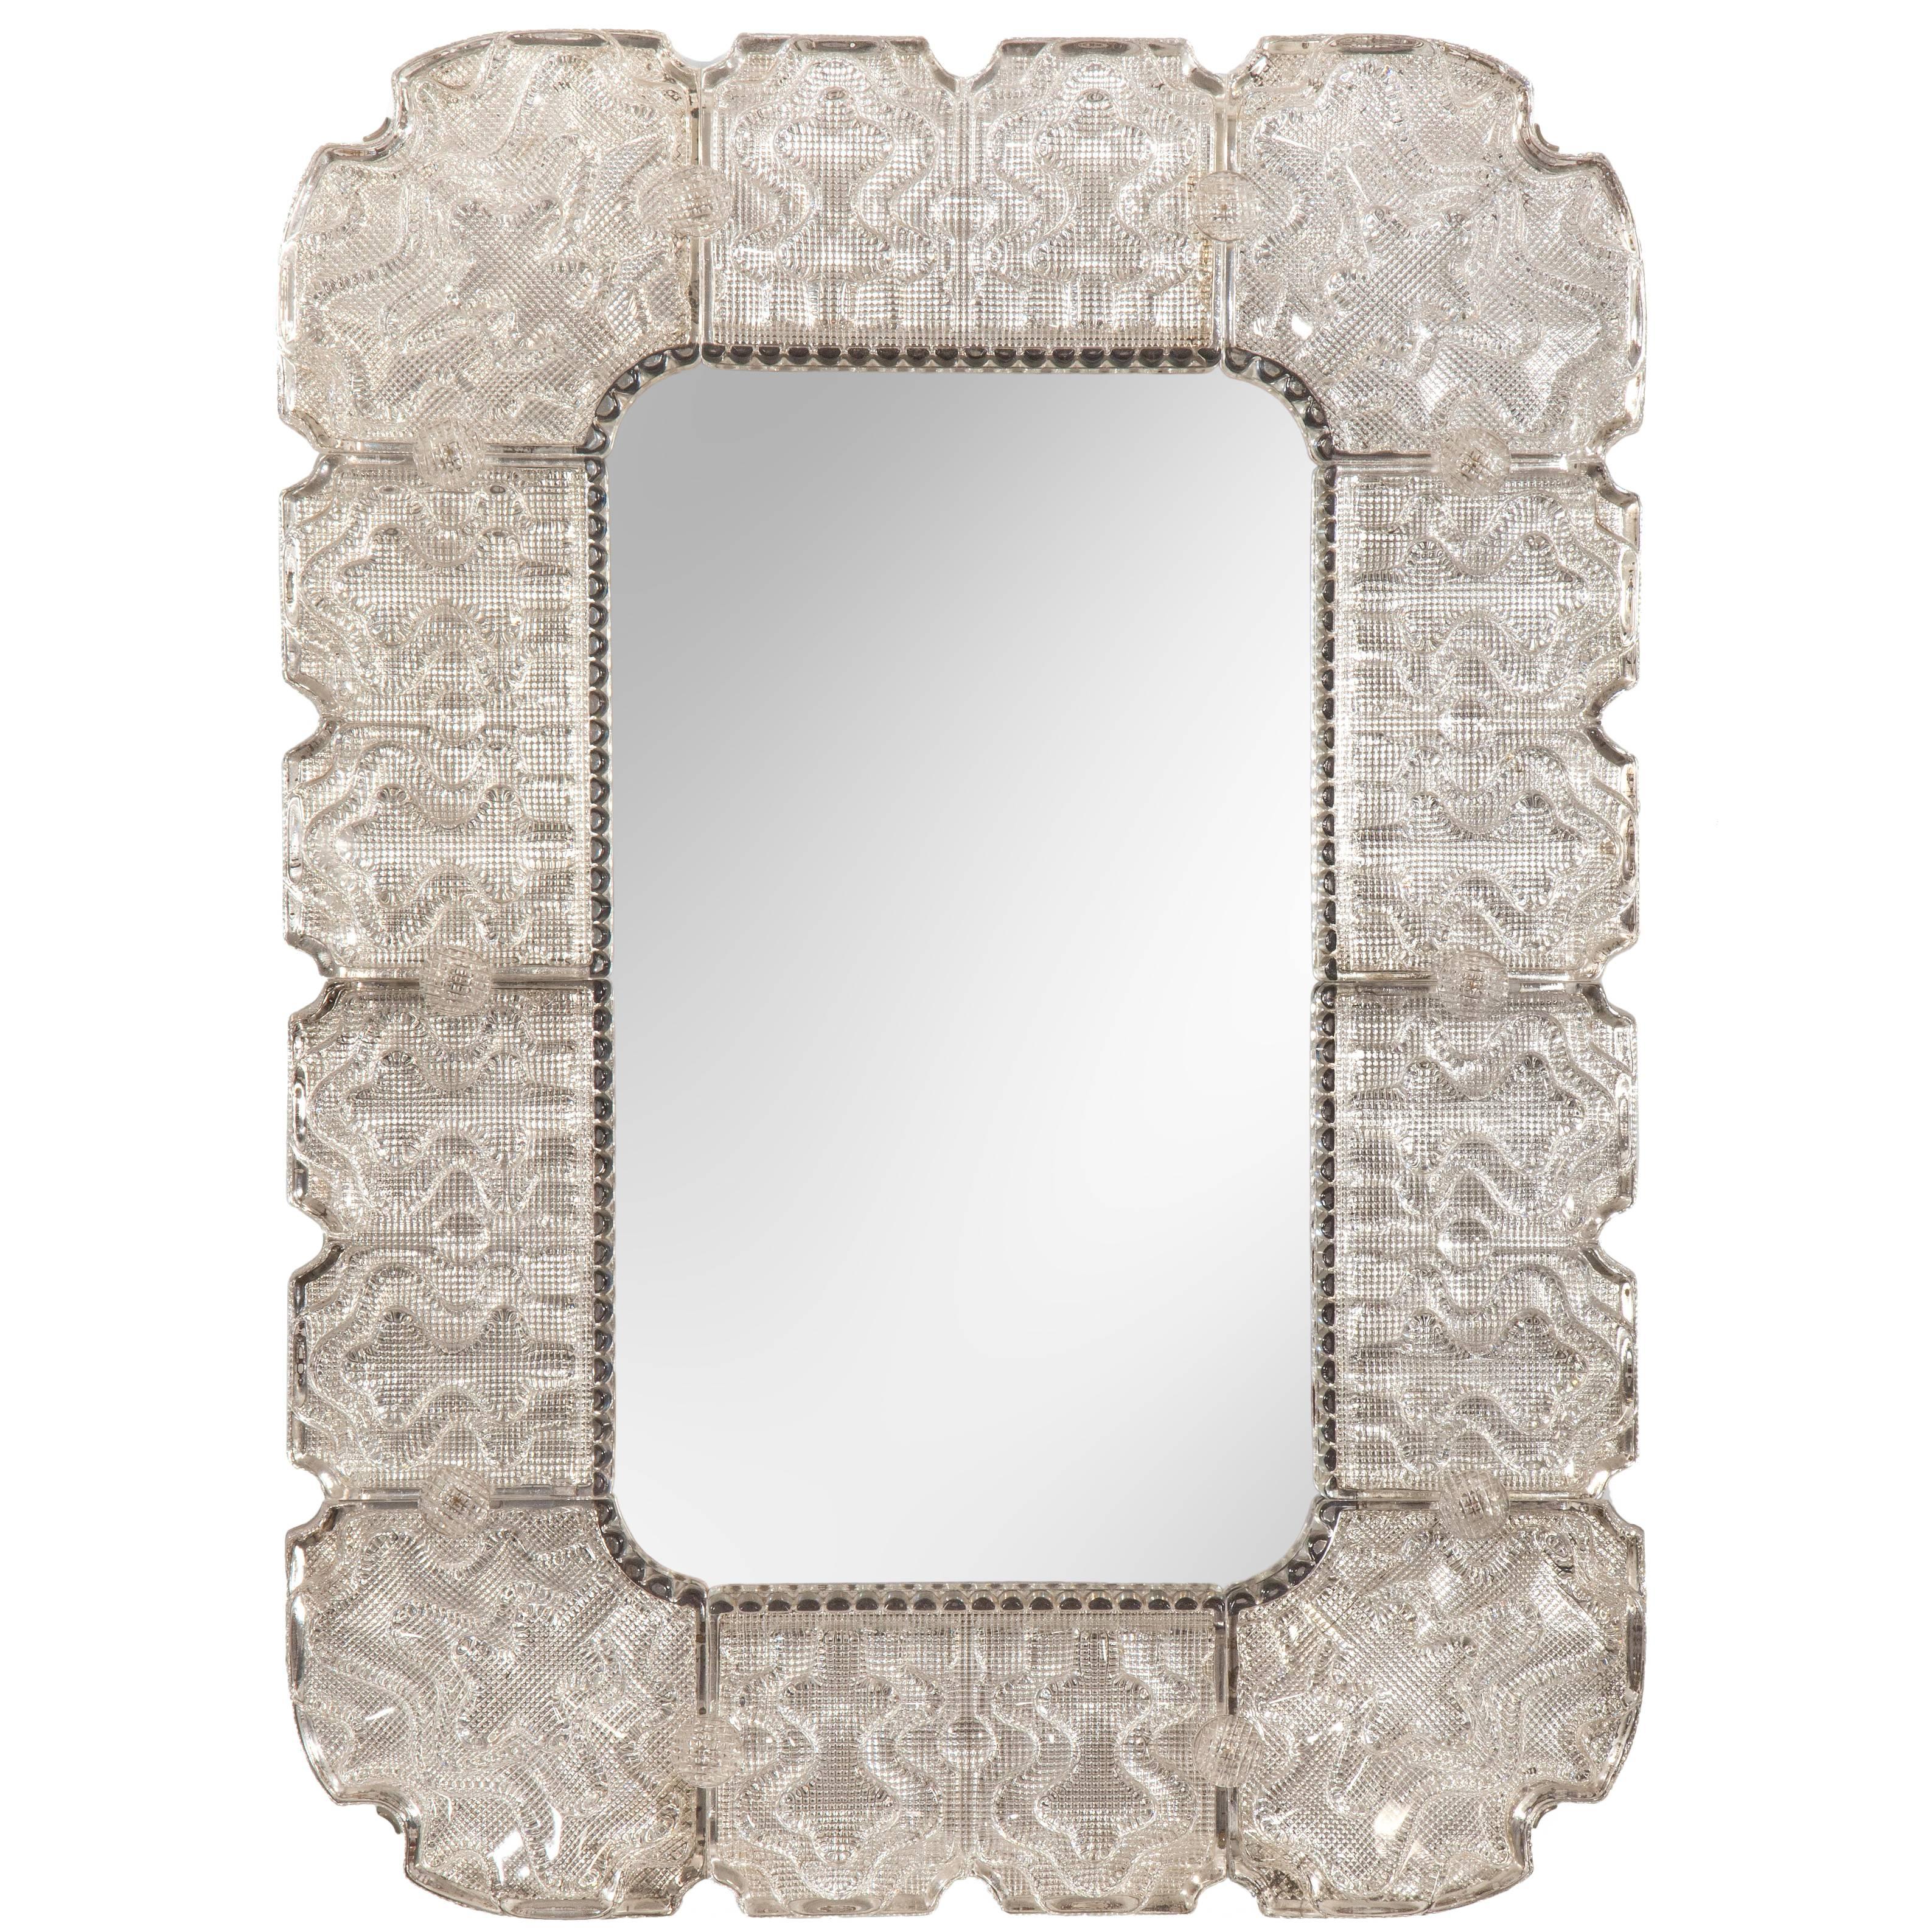 Carl Fagerlund for Orrefors, A Powder Room Scaled Swedish Cast Glass Mirror